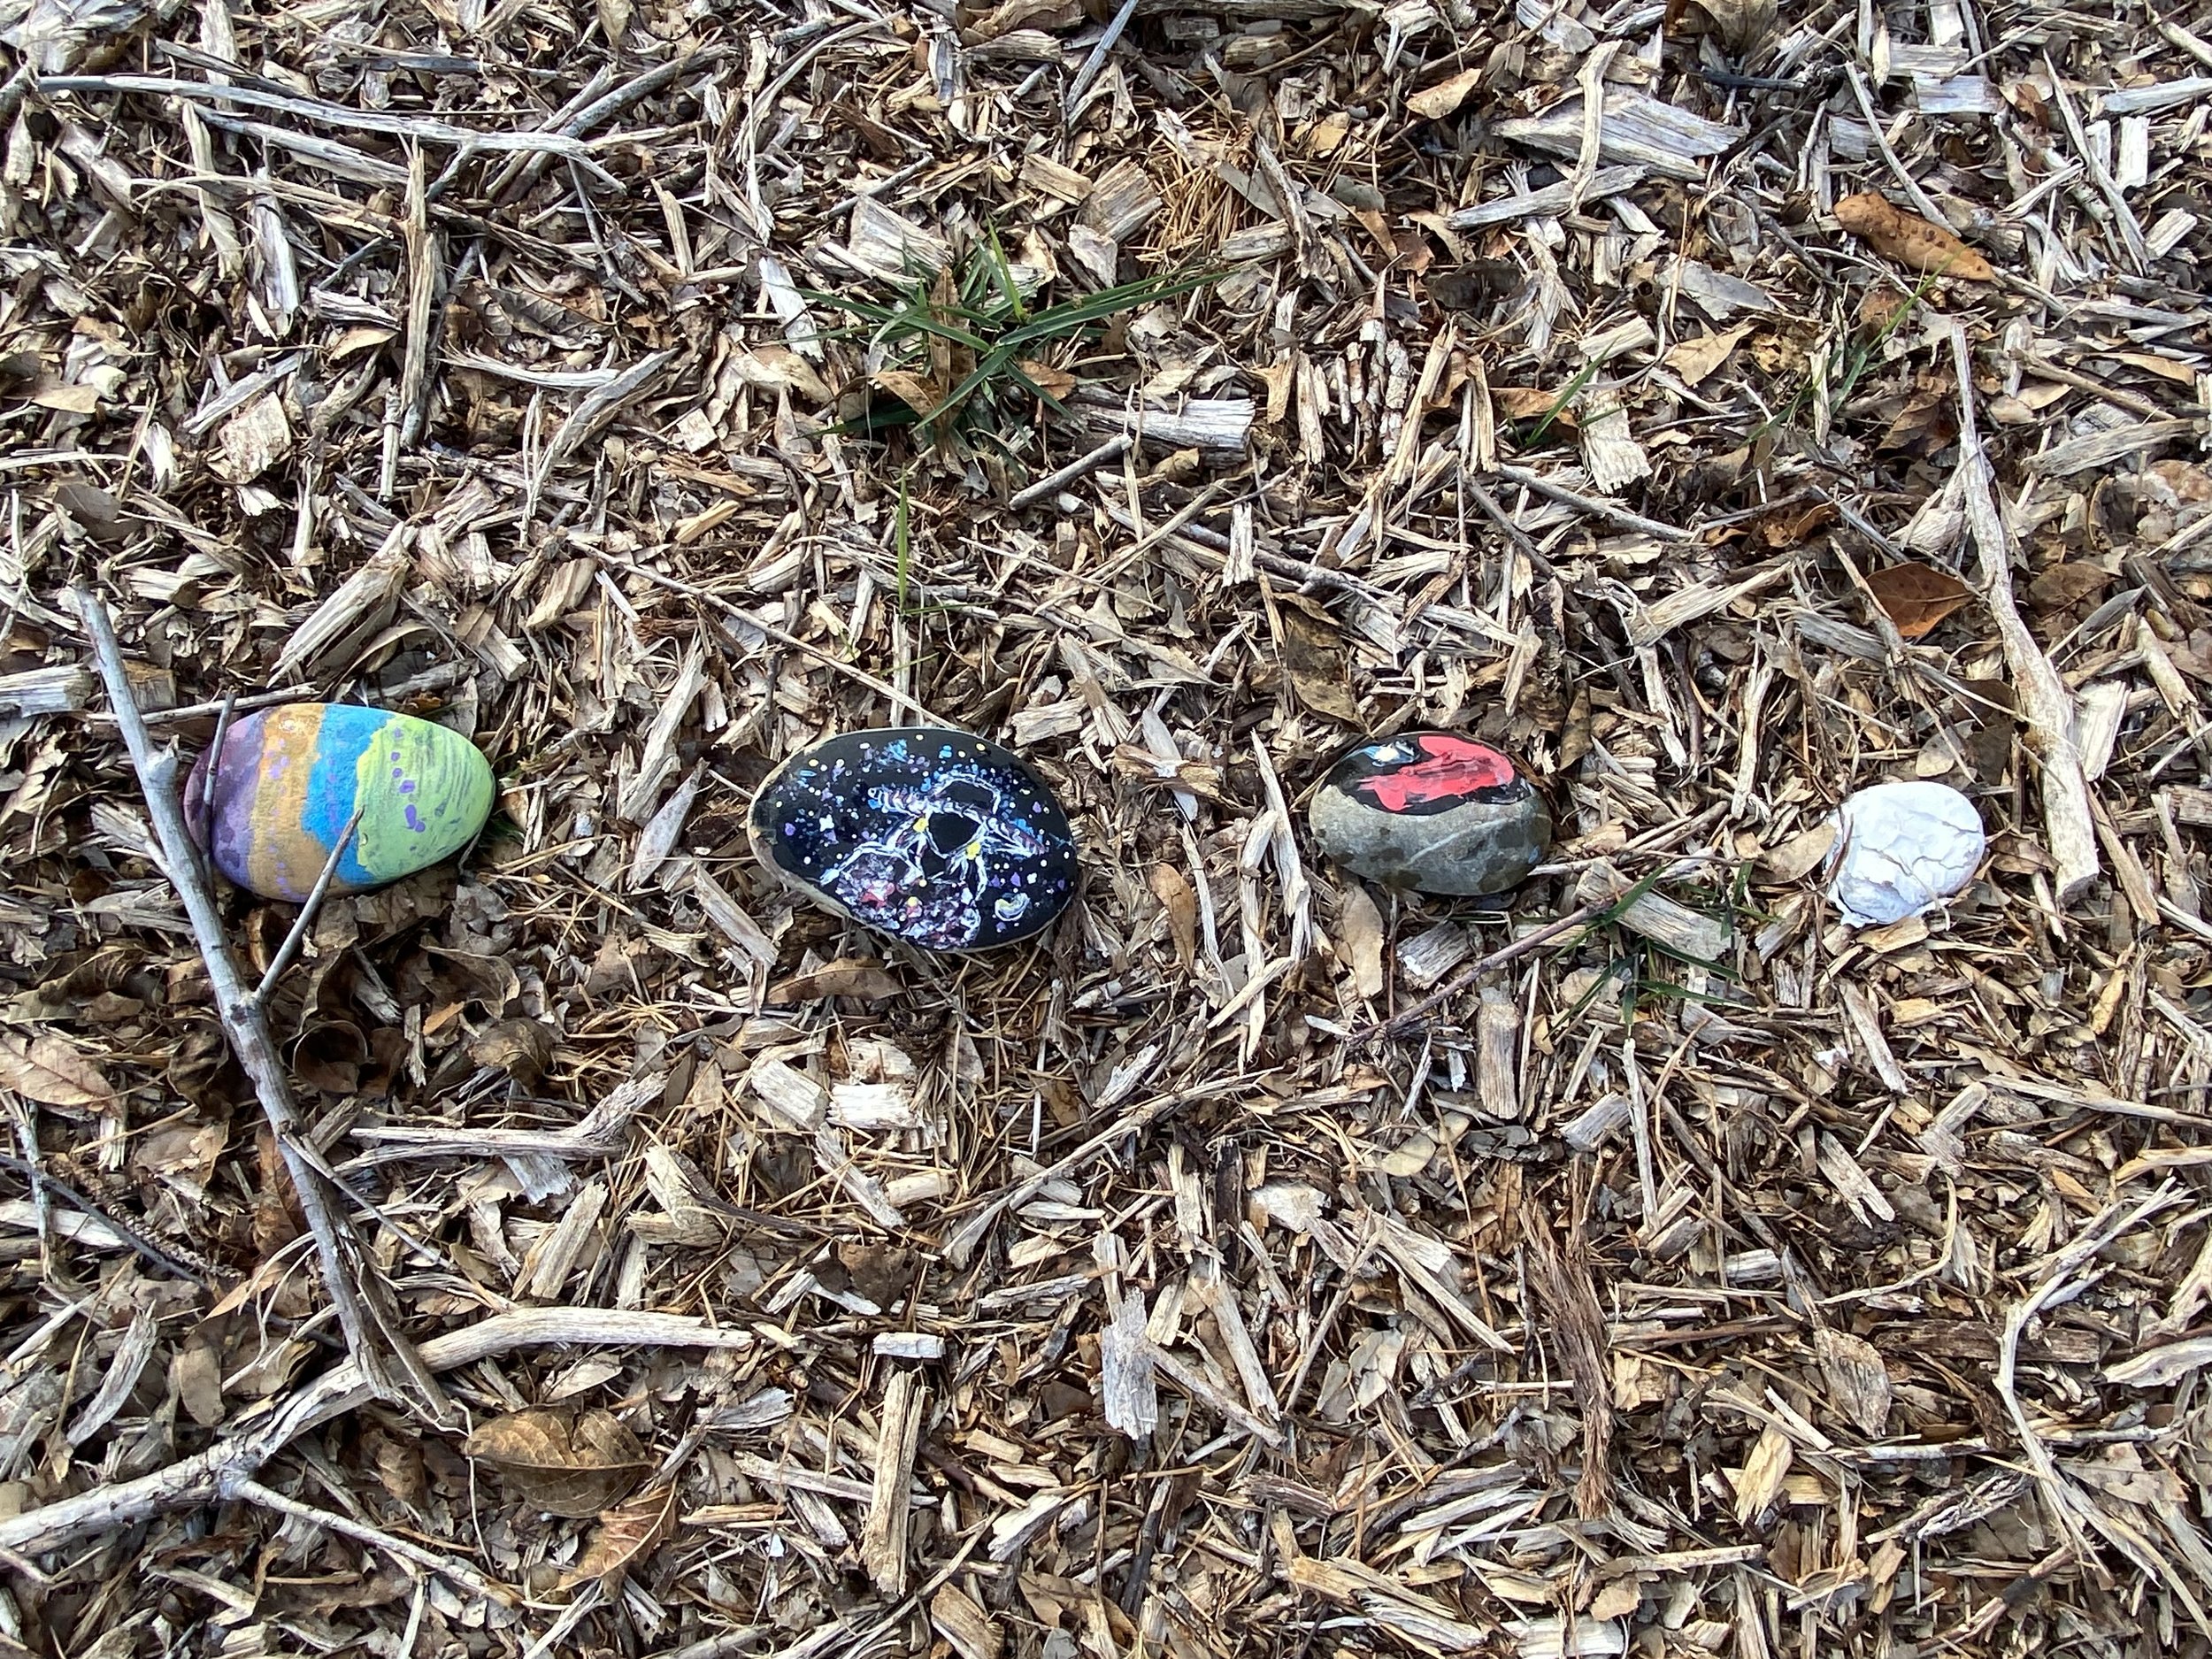 Rocks painted by 4H students border the plantings